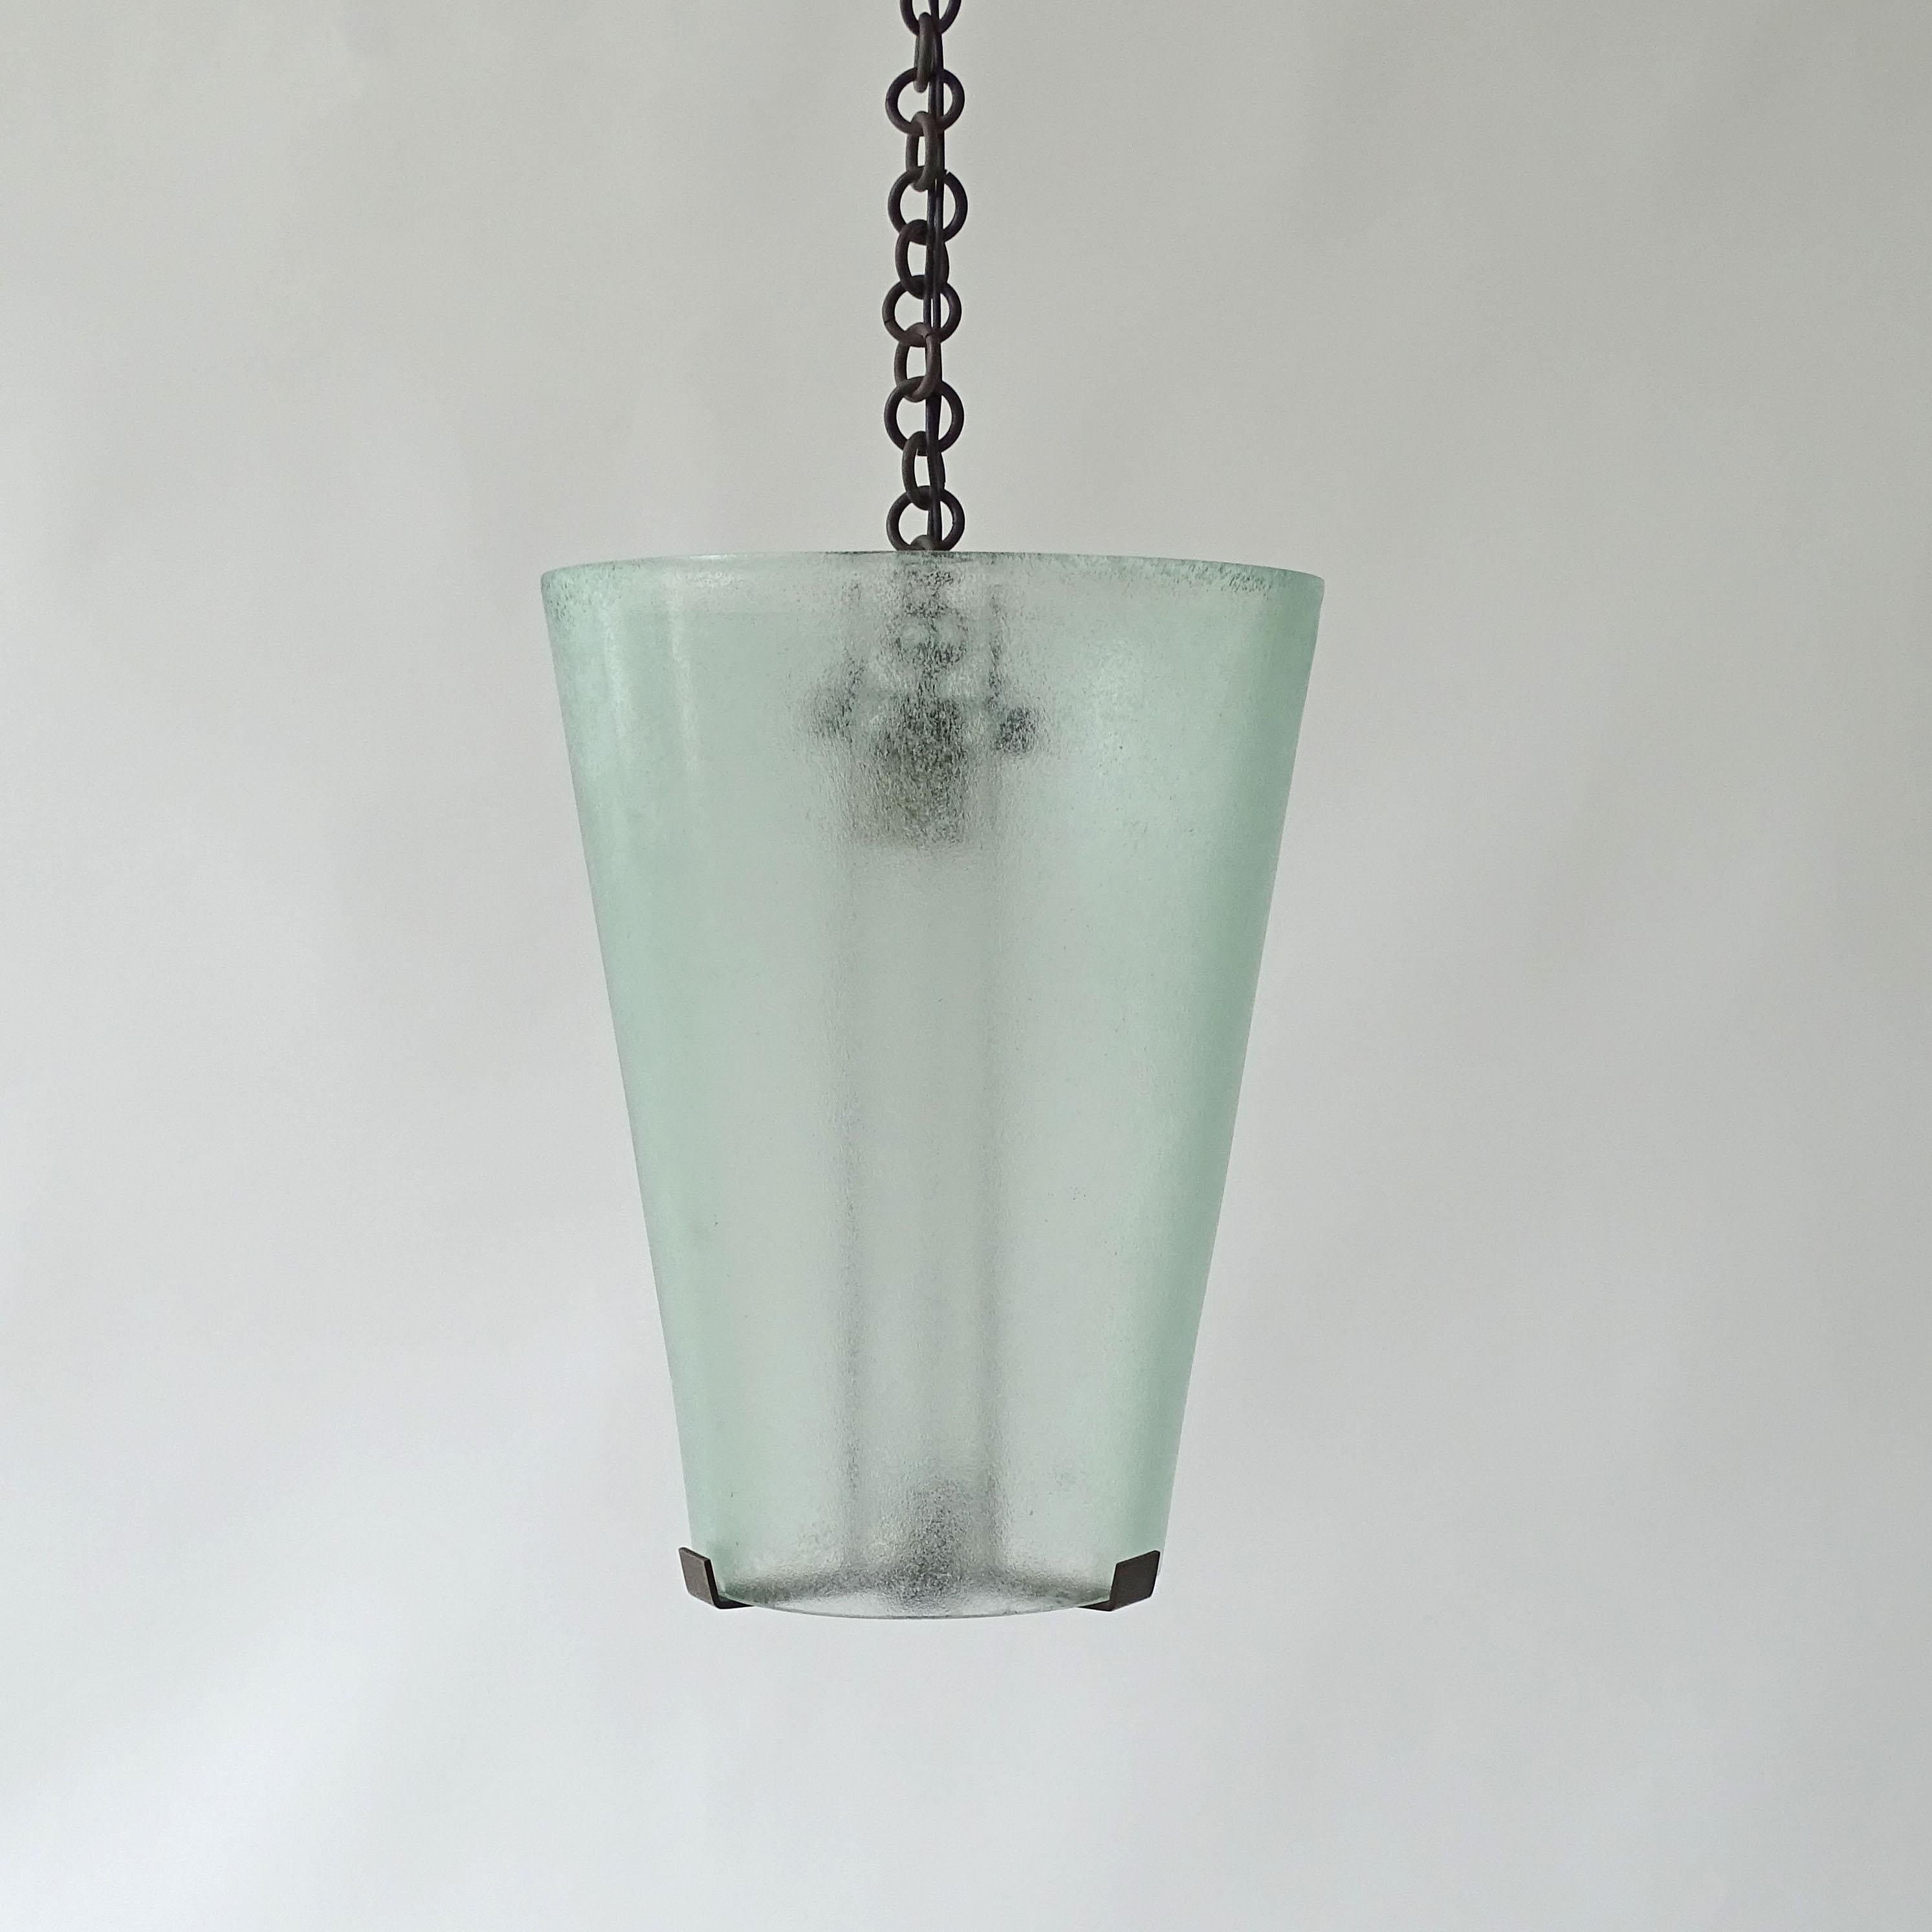 Splendid Guglielmo Ulrich Brass and Murano Glass Ceiling Lamp,
The Glass is Light Green Corroso Glass Manufactured by Seguso Vetri D'Arte
Italy 1940s